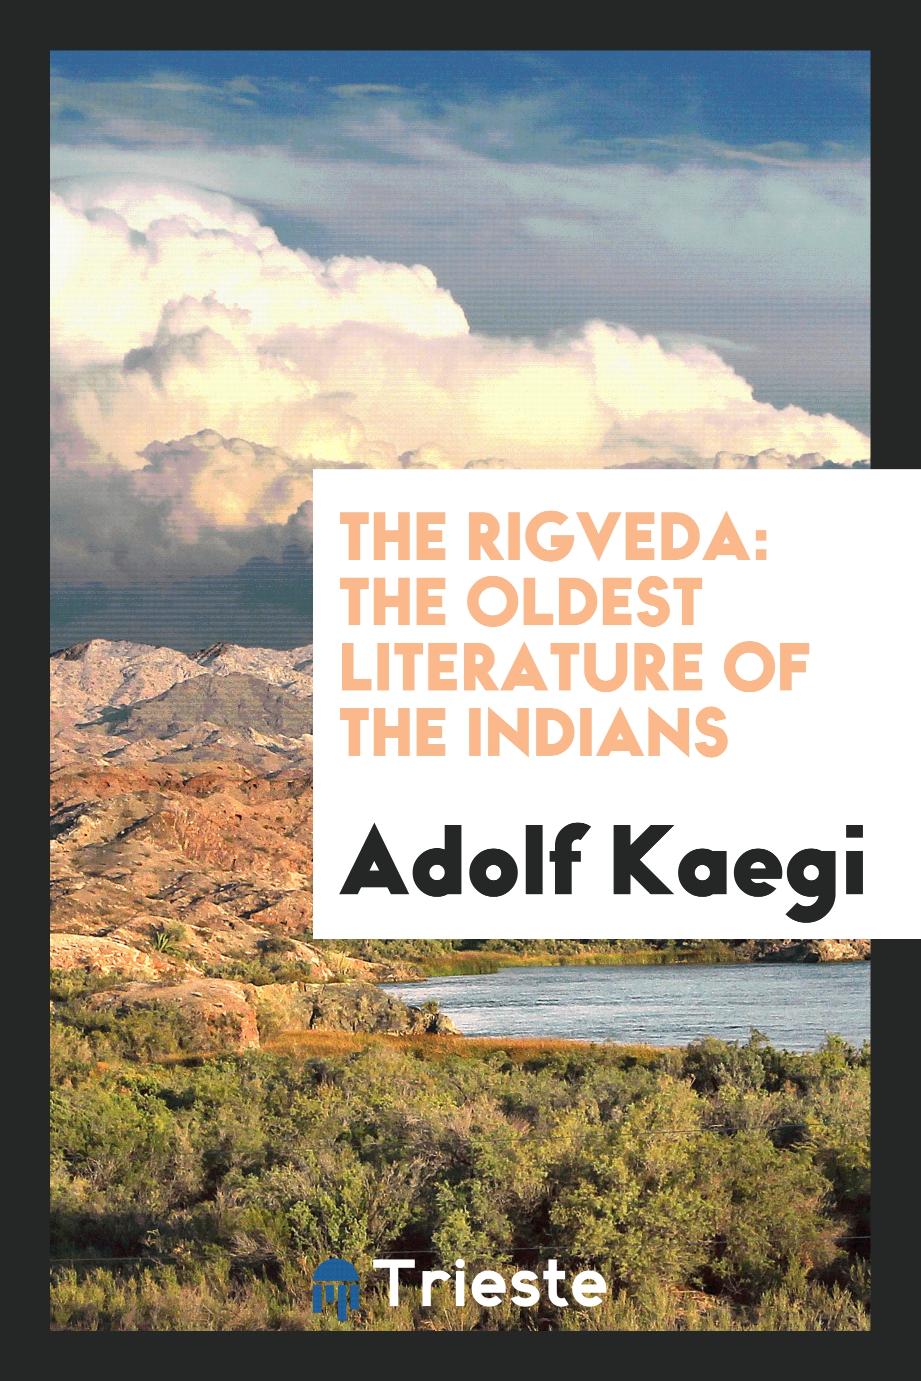 The Rigveda: The Oldest Literature of the Indians